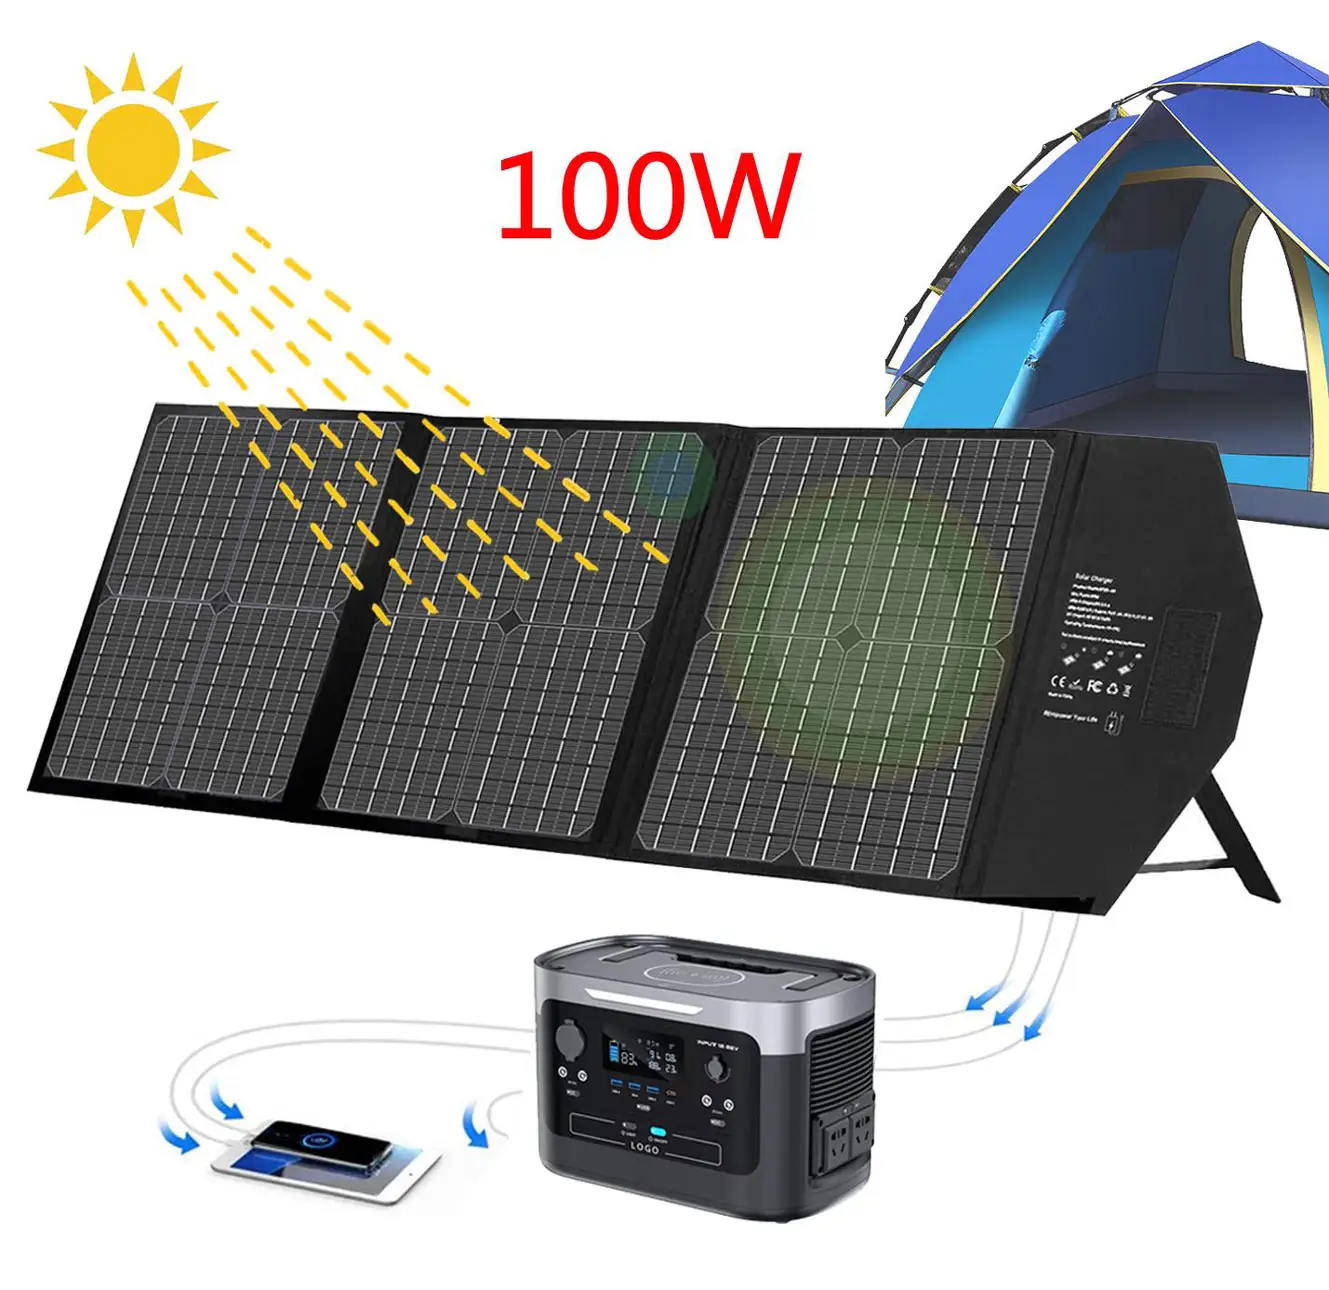 Portable 100w Watt ETFE Kickstand Mini Flexible Foldable Systems Solar Photovoltaic Panel Charger Kit For Home Camping Outdoor